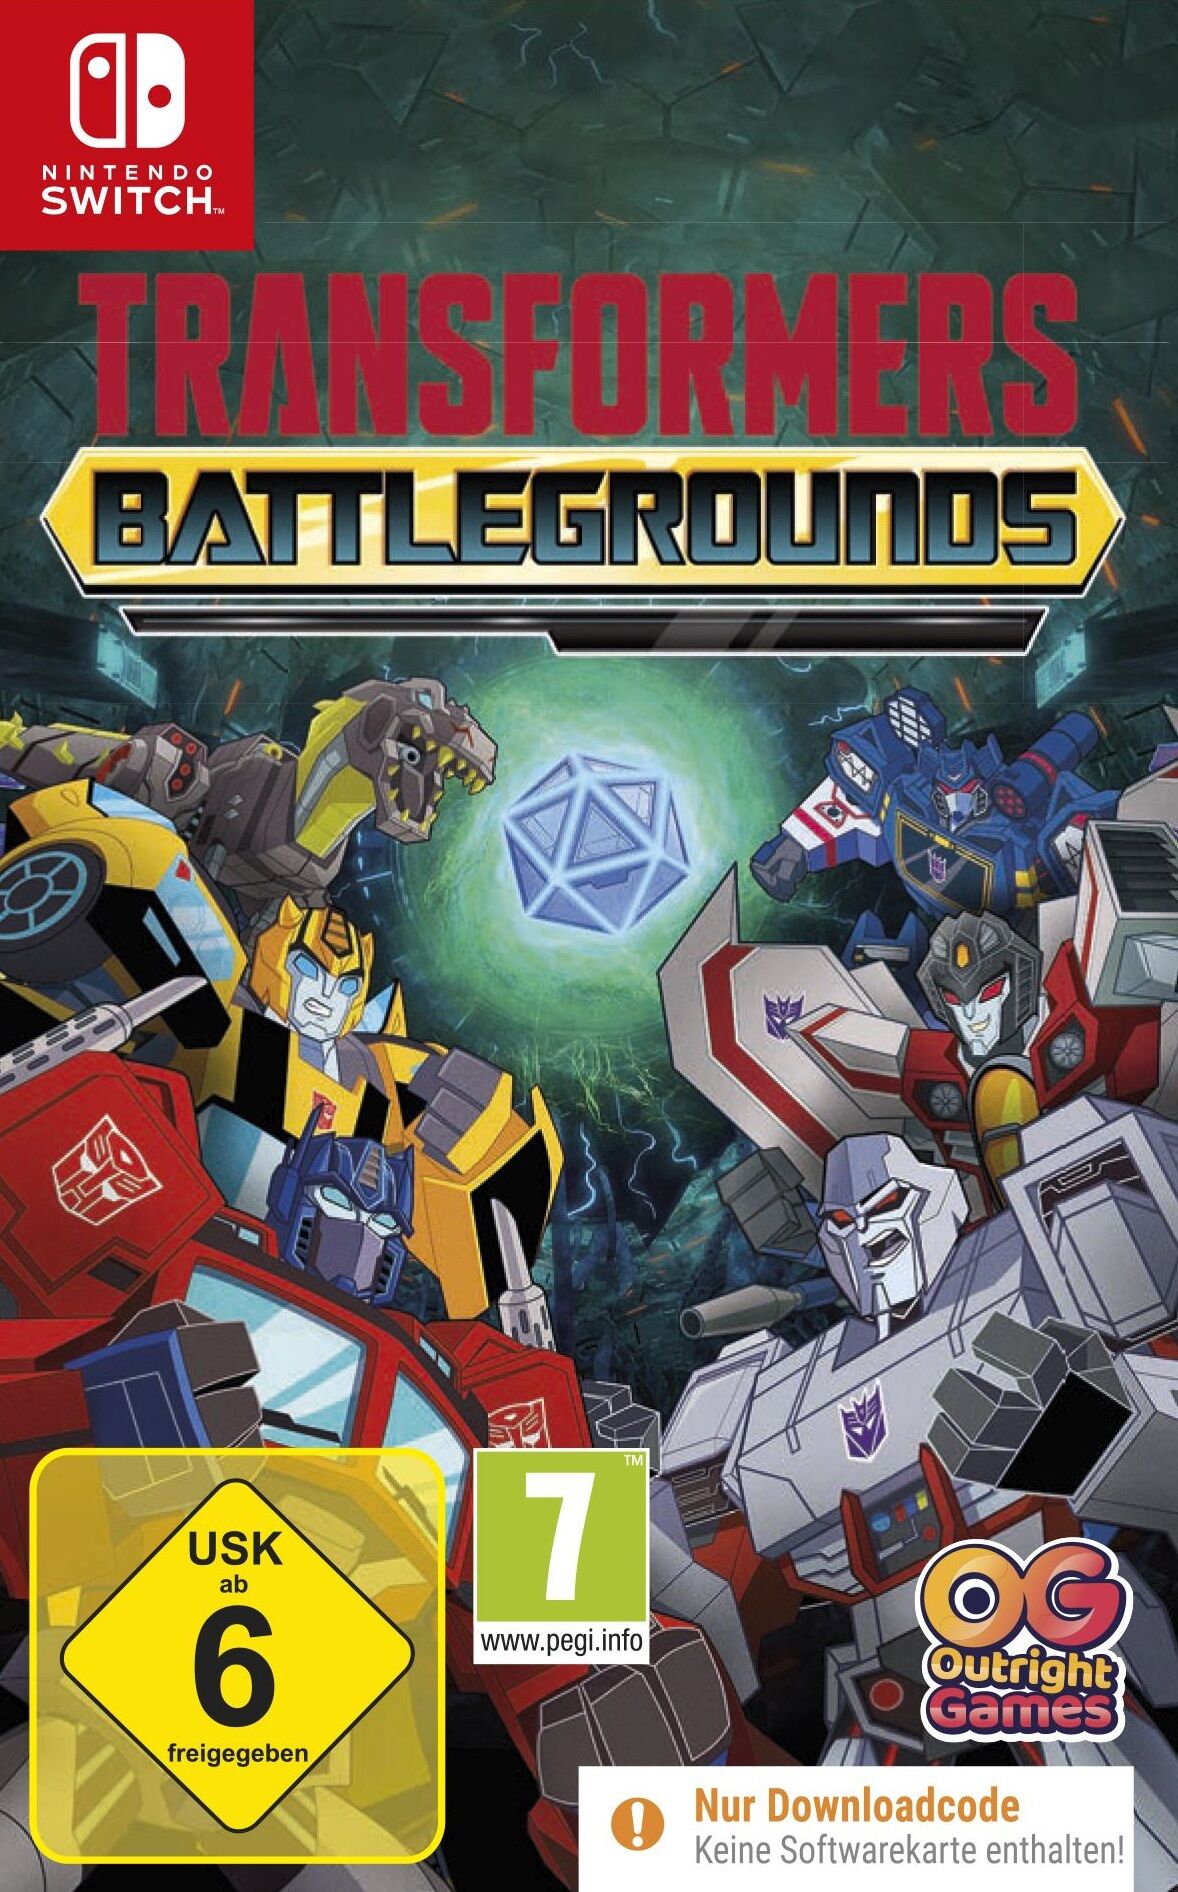 Divers Outright Games - Transformers: Battlegrounds [NSW] [Code in a Box] (D)